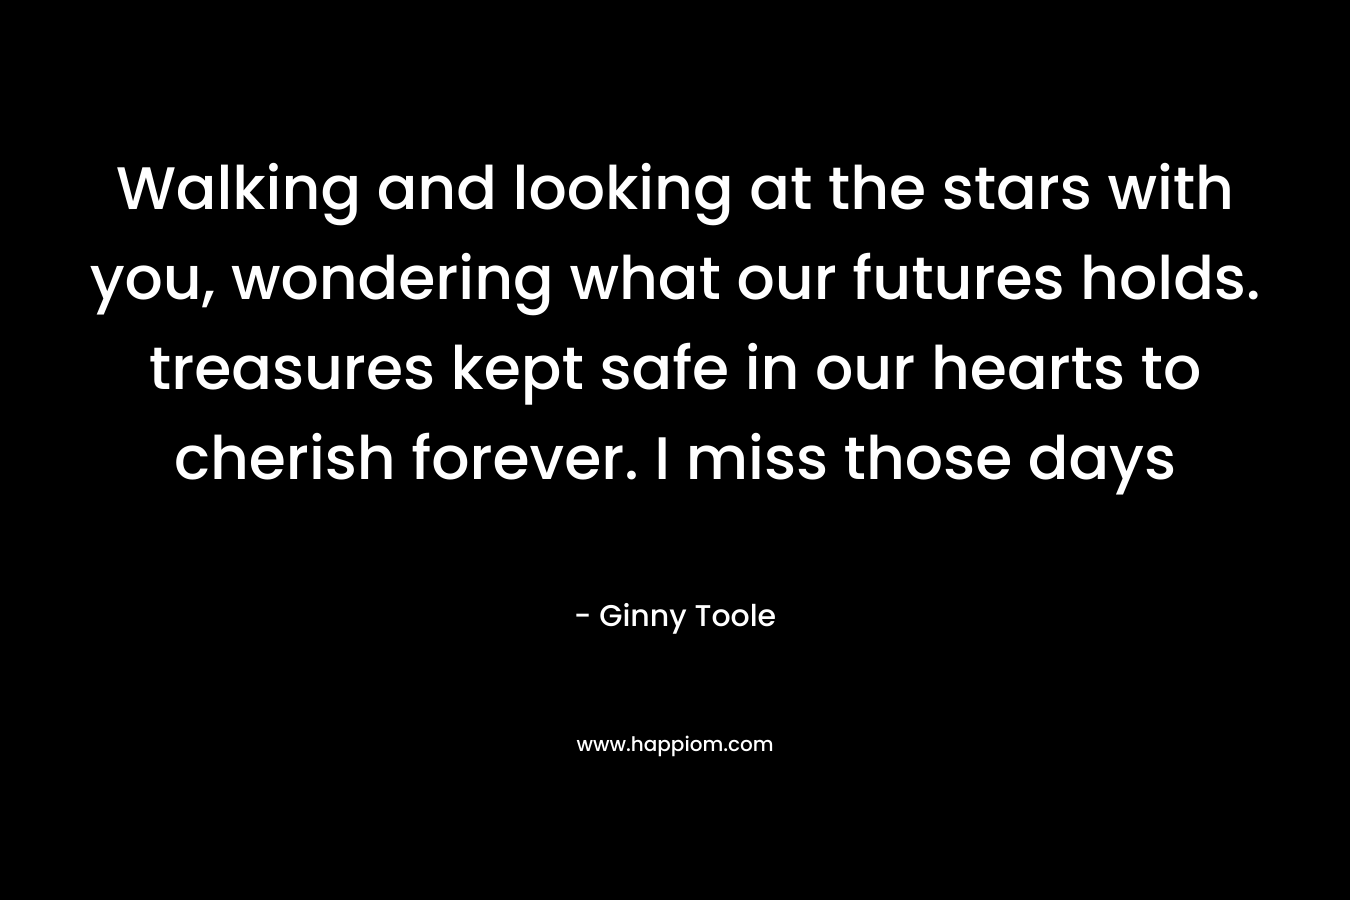 Walking and looking at the stars with you, wondering what our futures holds. treasures kept safe in our hearts to cherish forever. I miss those days